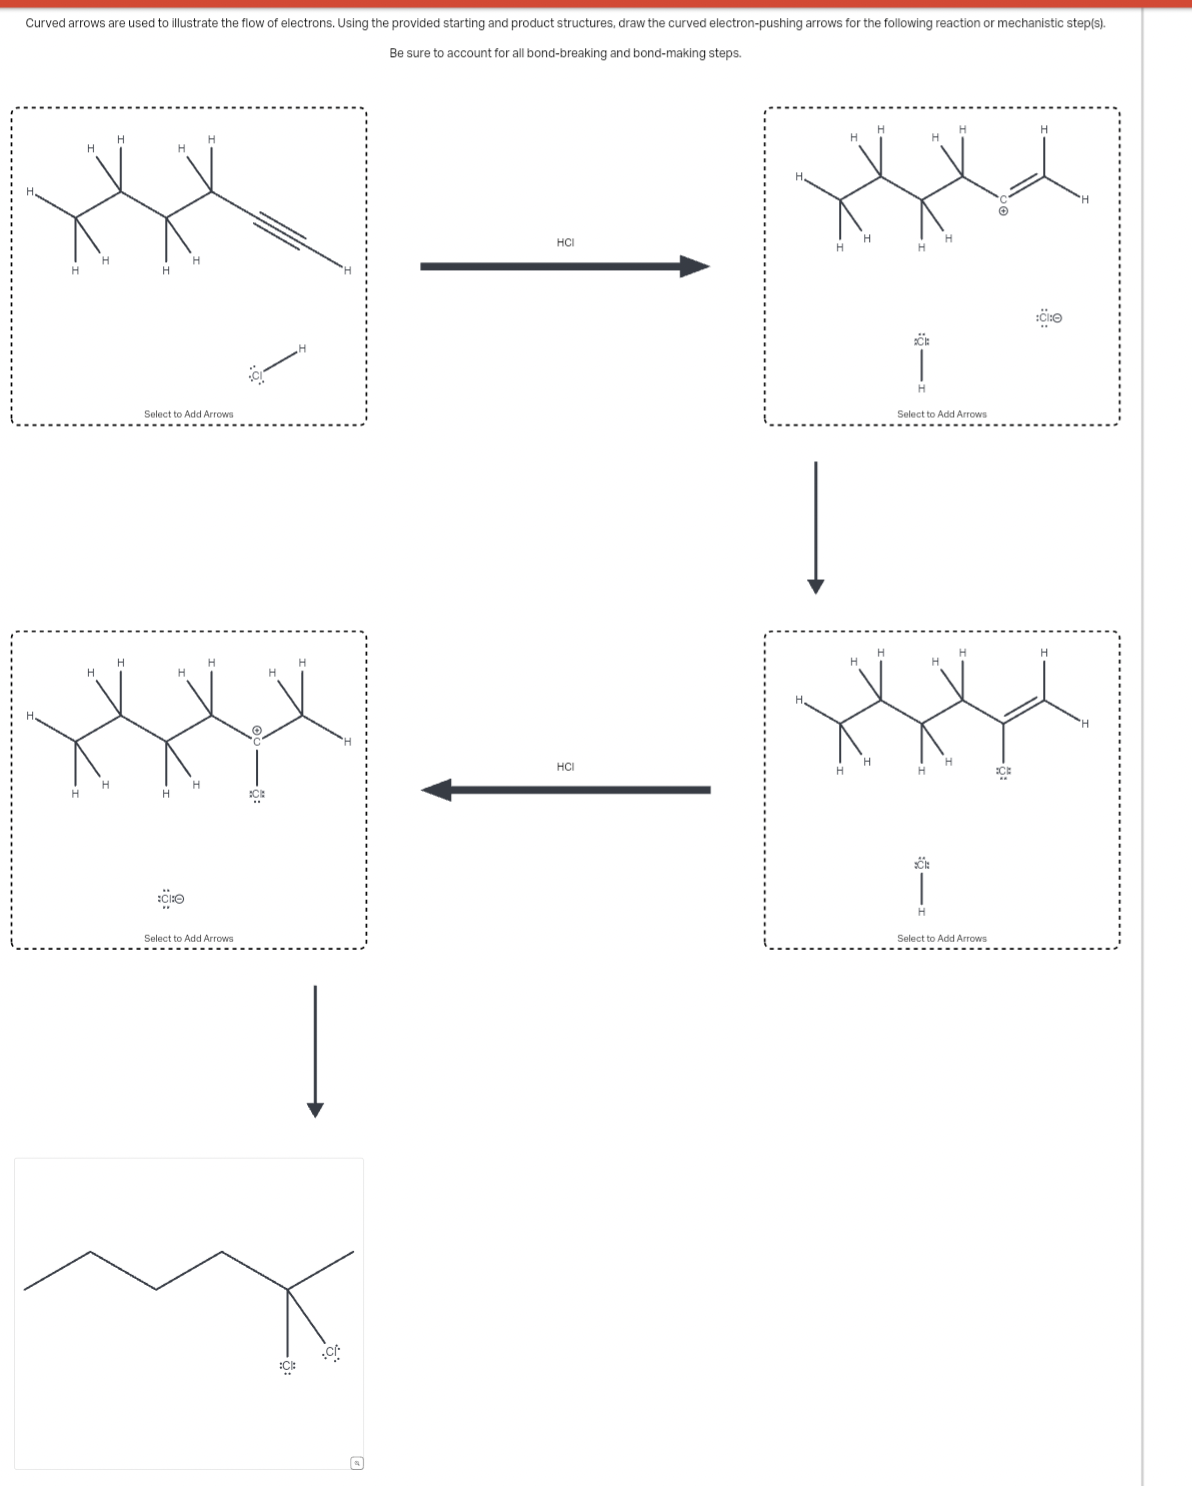 Curved arrows are used to illustrate the flow
f electrons. Using the provided starting and product structures, draw the curved electron-pushing arrows for the following reaction or mechanistic step(s).
Be sure to account for all bond-breaking and bond-making steps.
H
H
HCI
H
H
H
H
H
Select to Add Arrows
H
H
H
H
H
H
:C
Select to Add Arrows
:C:
:C/
CE
H
Select to Add Arrows
HCI
H
ECE
Select to Add Arrows
H
:CI:O